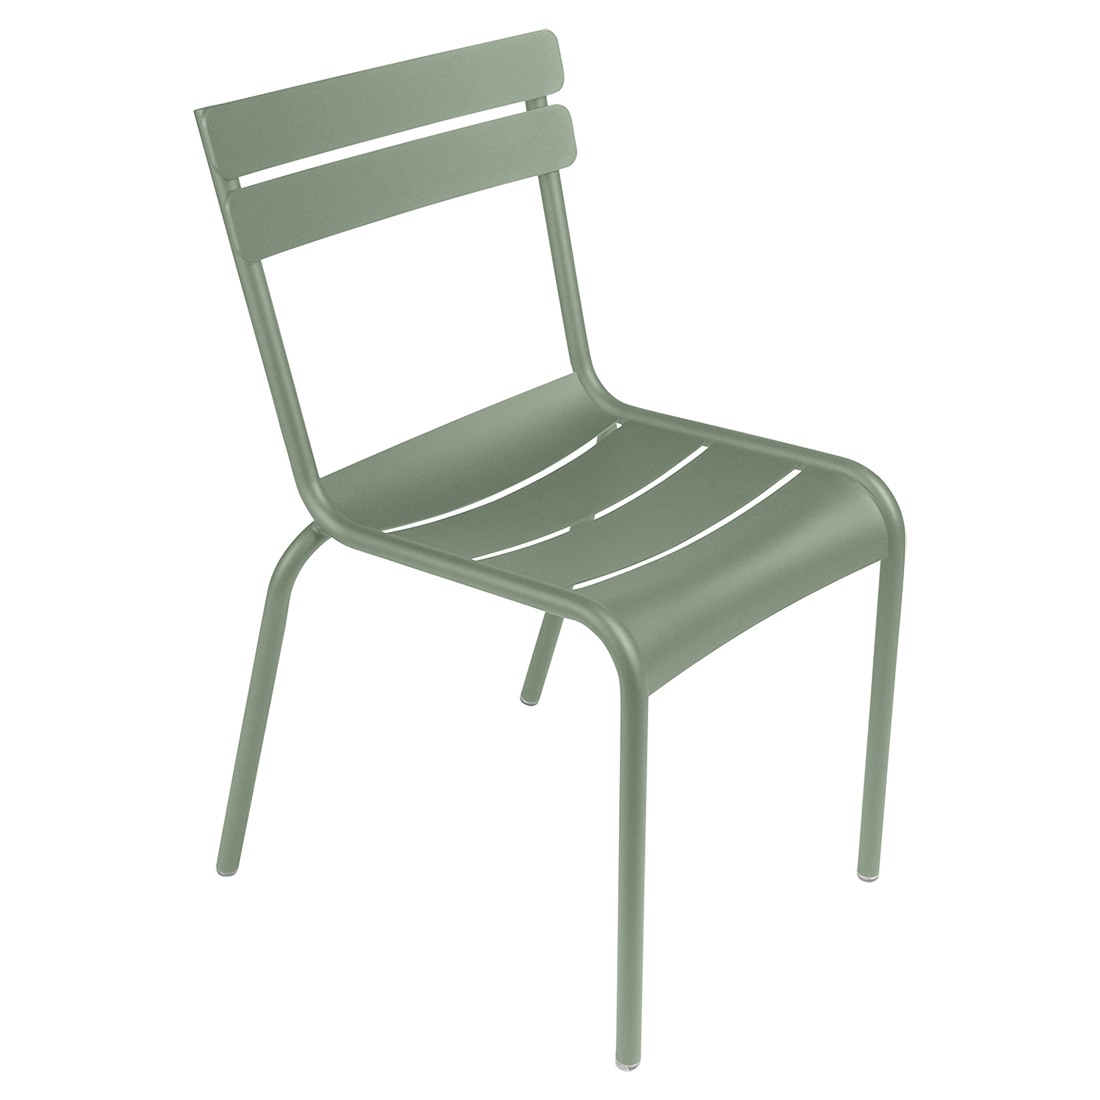 LUXEMBOURG / CHAIR